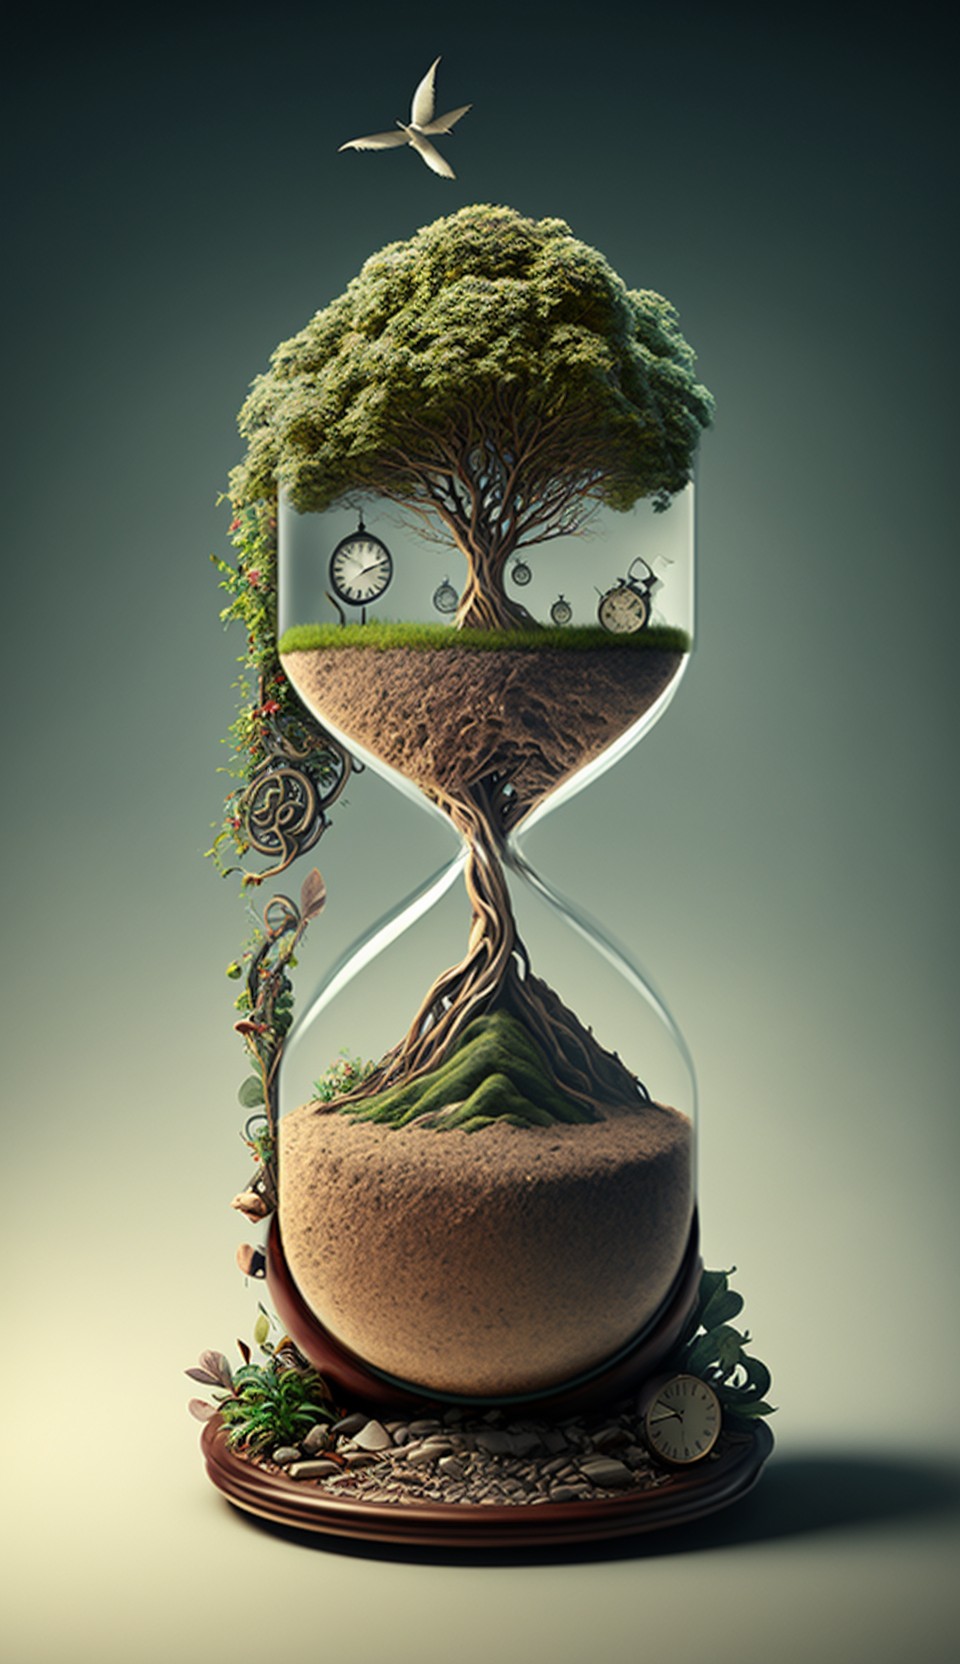 8 images of magic hourglass in time by Midjourney